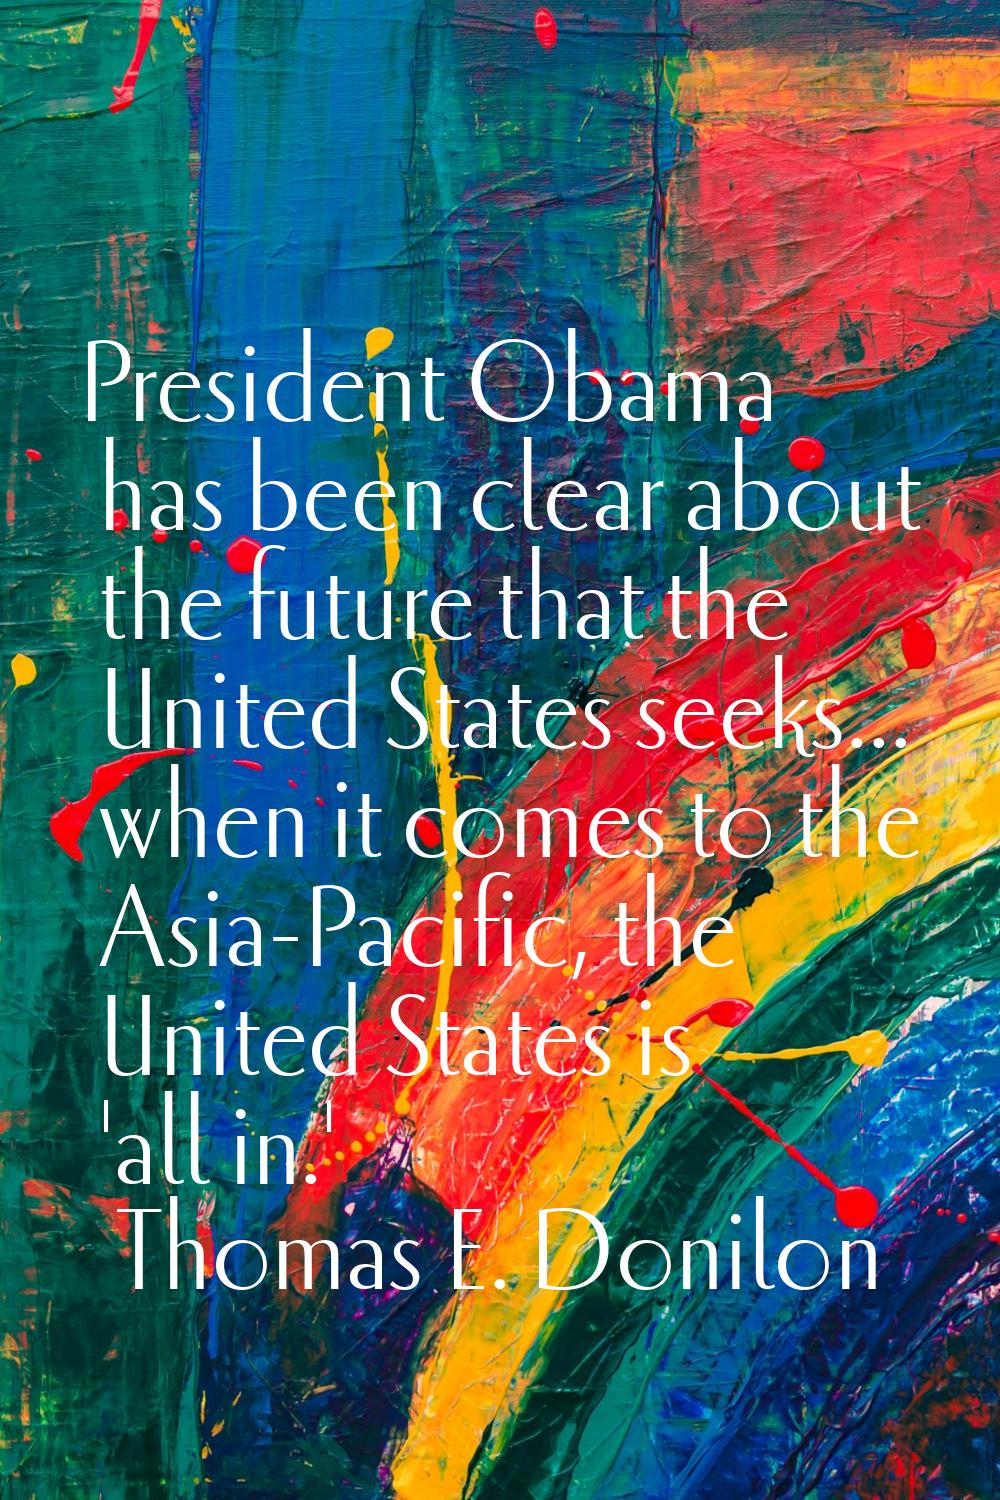 President Obama has been clear about the future that the United States seeks... when it comes to th